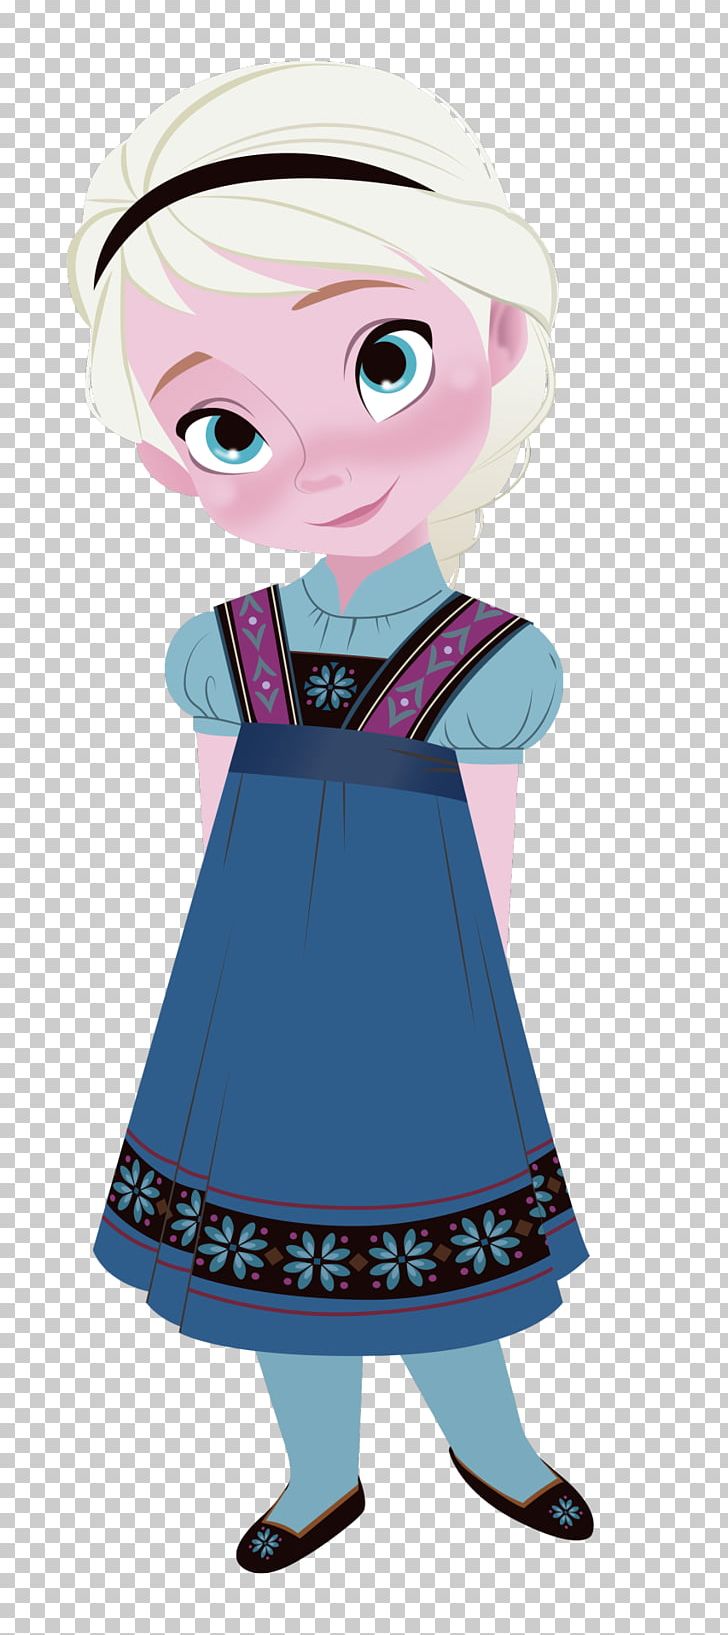 Elsa Anna Olaf Frozen Film Series PNG, Clipart, Anime, Anna, Art, Cartoon, Clothing Free PNG Download